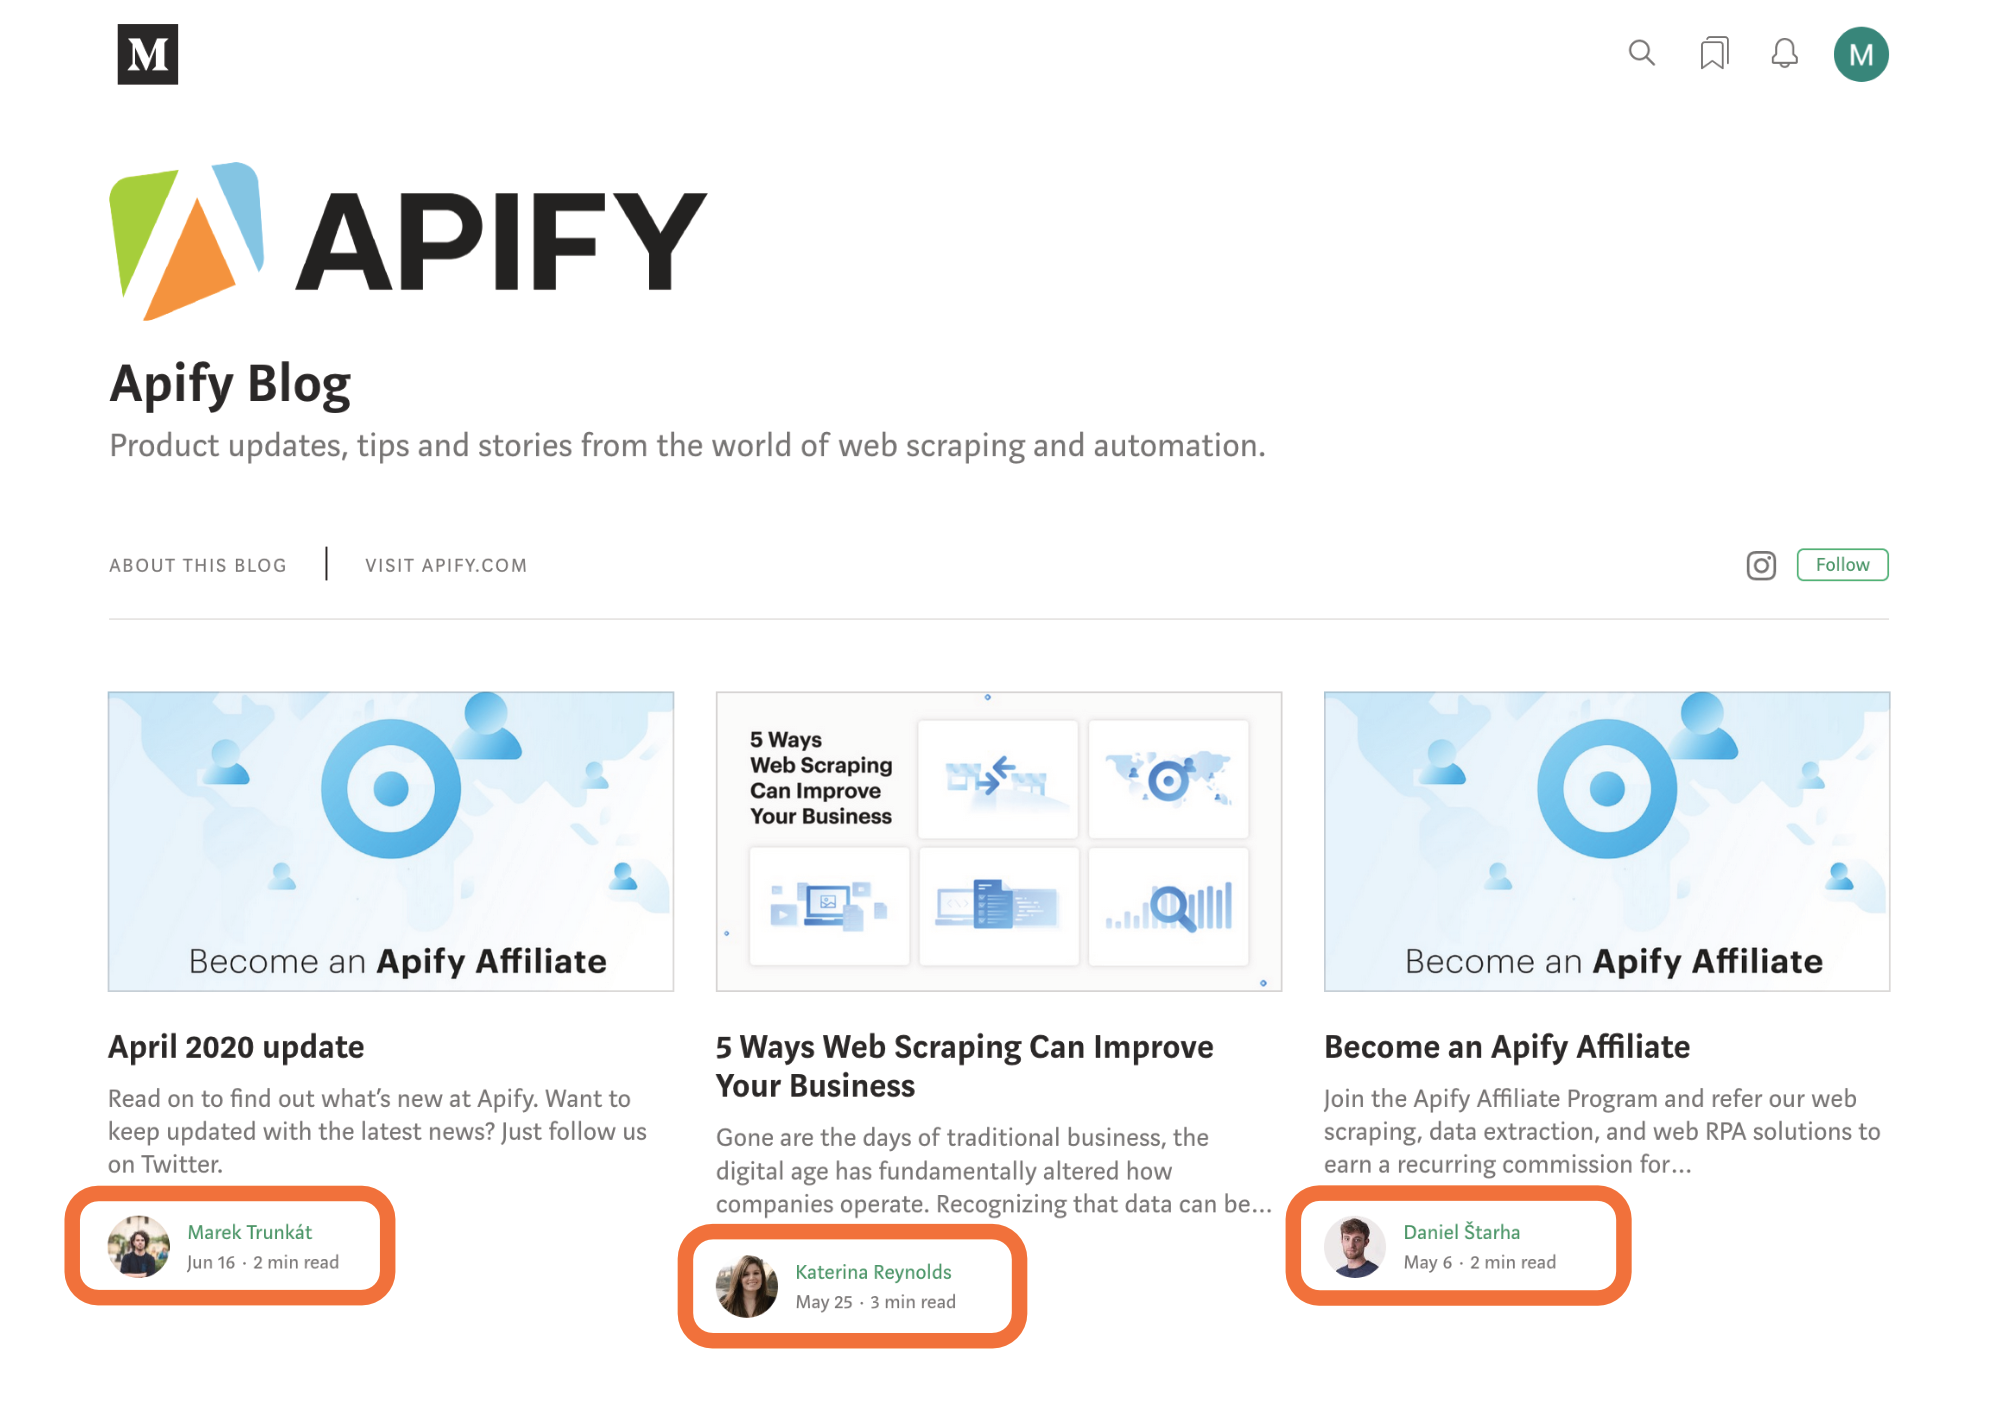 The Apify blog, which features posts from multiple authors